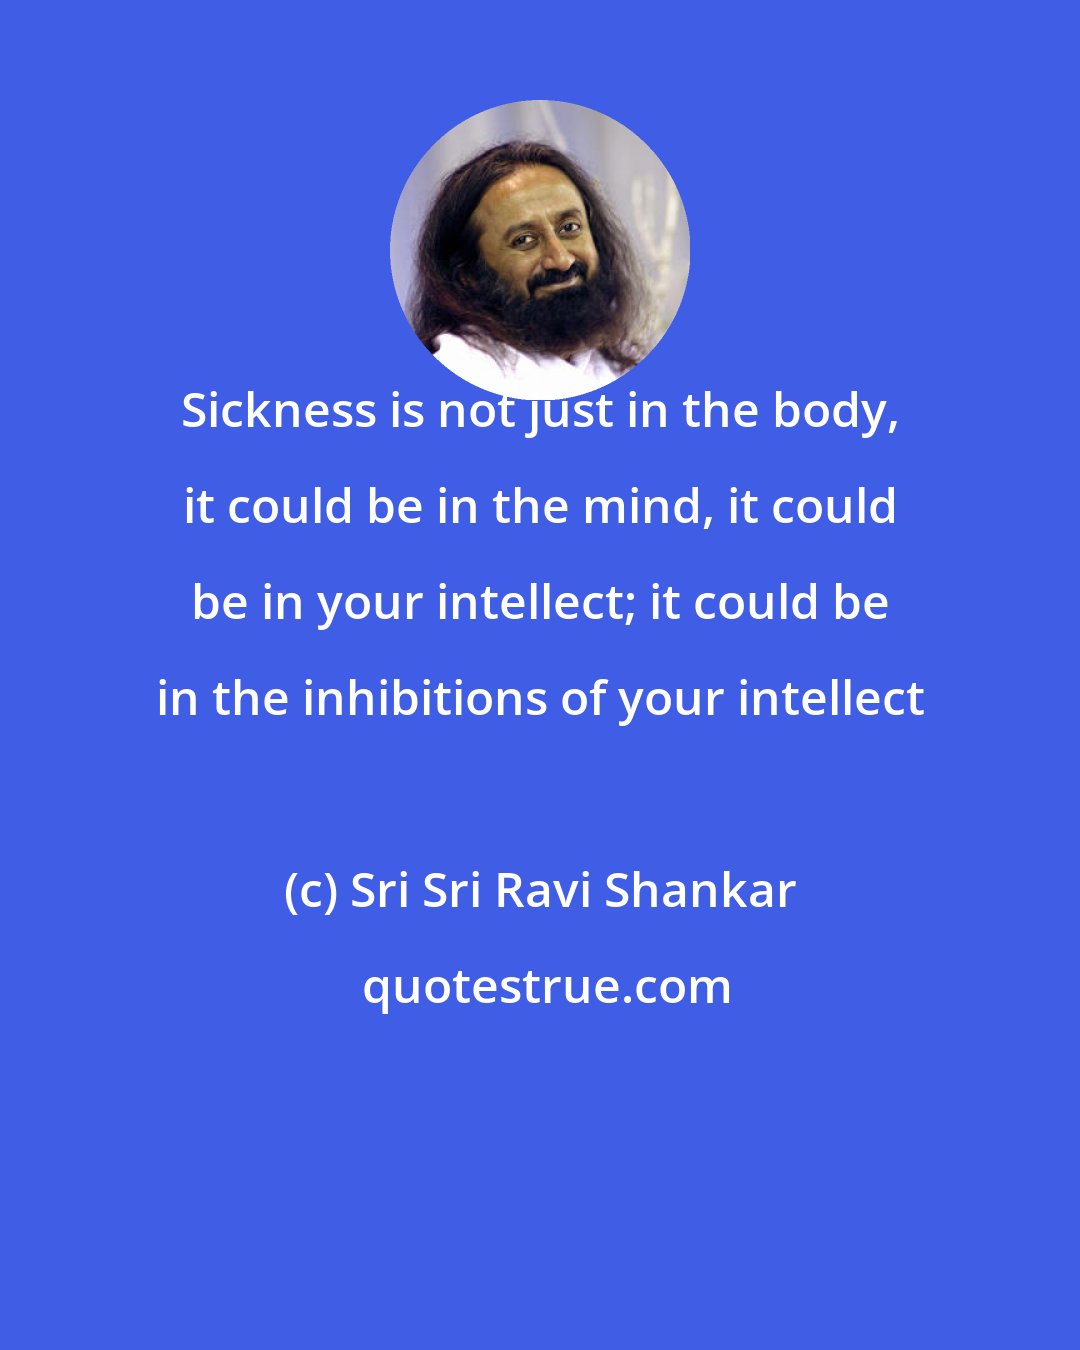 Sri Sri Ravi Shankar: Sickness is not just in the body, it could be in the mind, it could be in your intellect; it could be in the inhibitions of your intellect